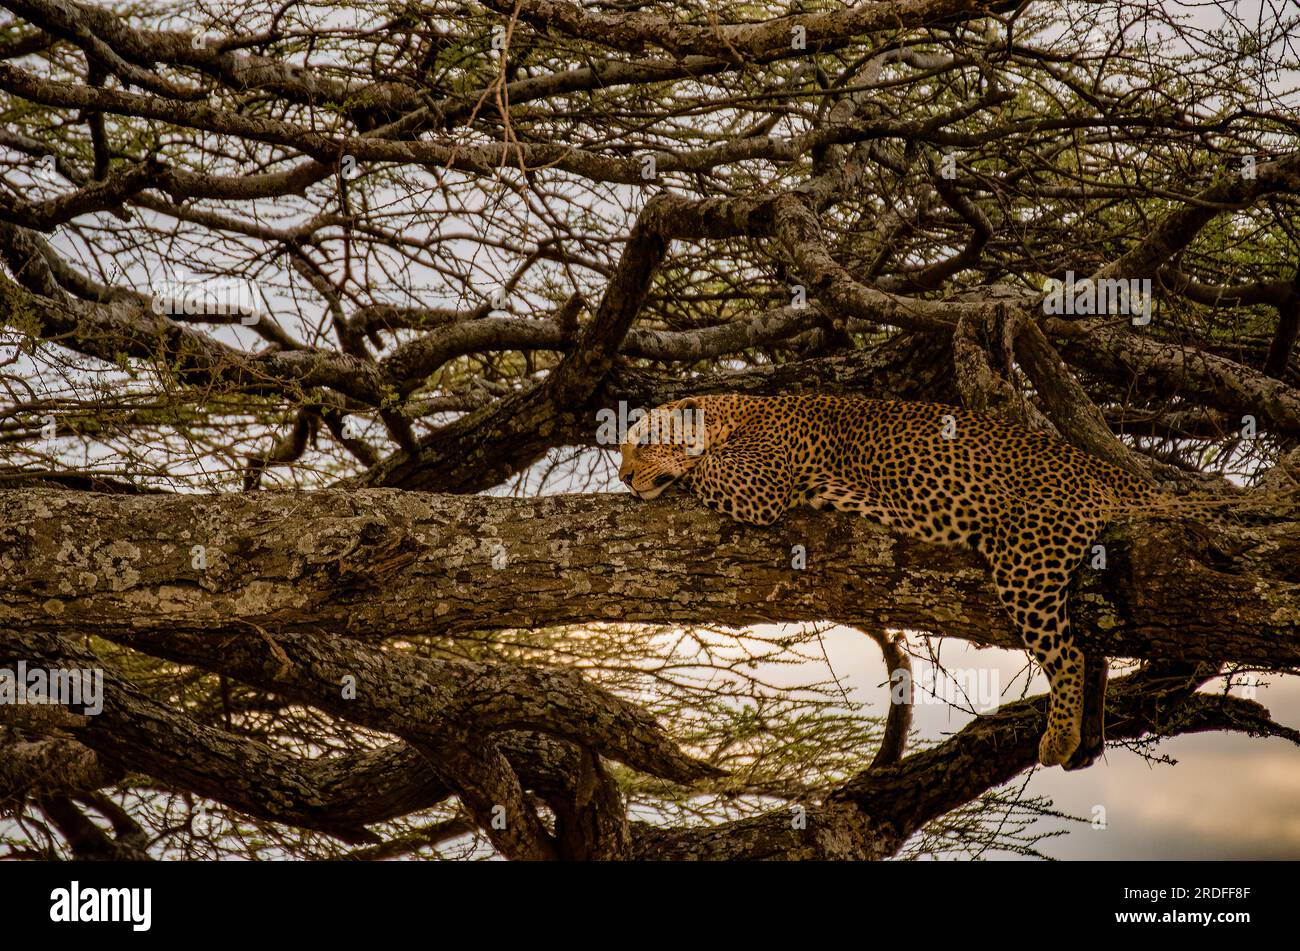 Photograph Of A Male Leopard Lying On An Acacia Tree During A Sunset In